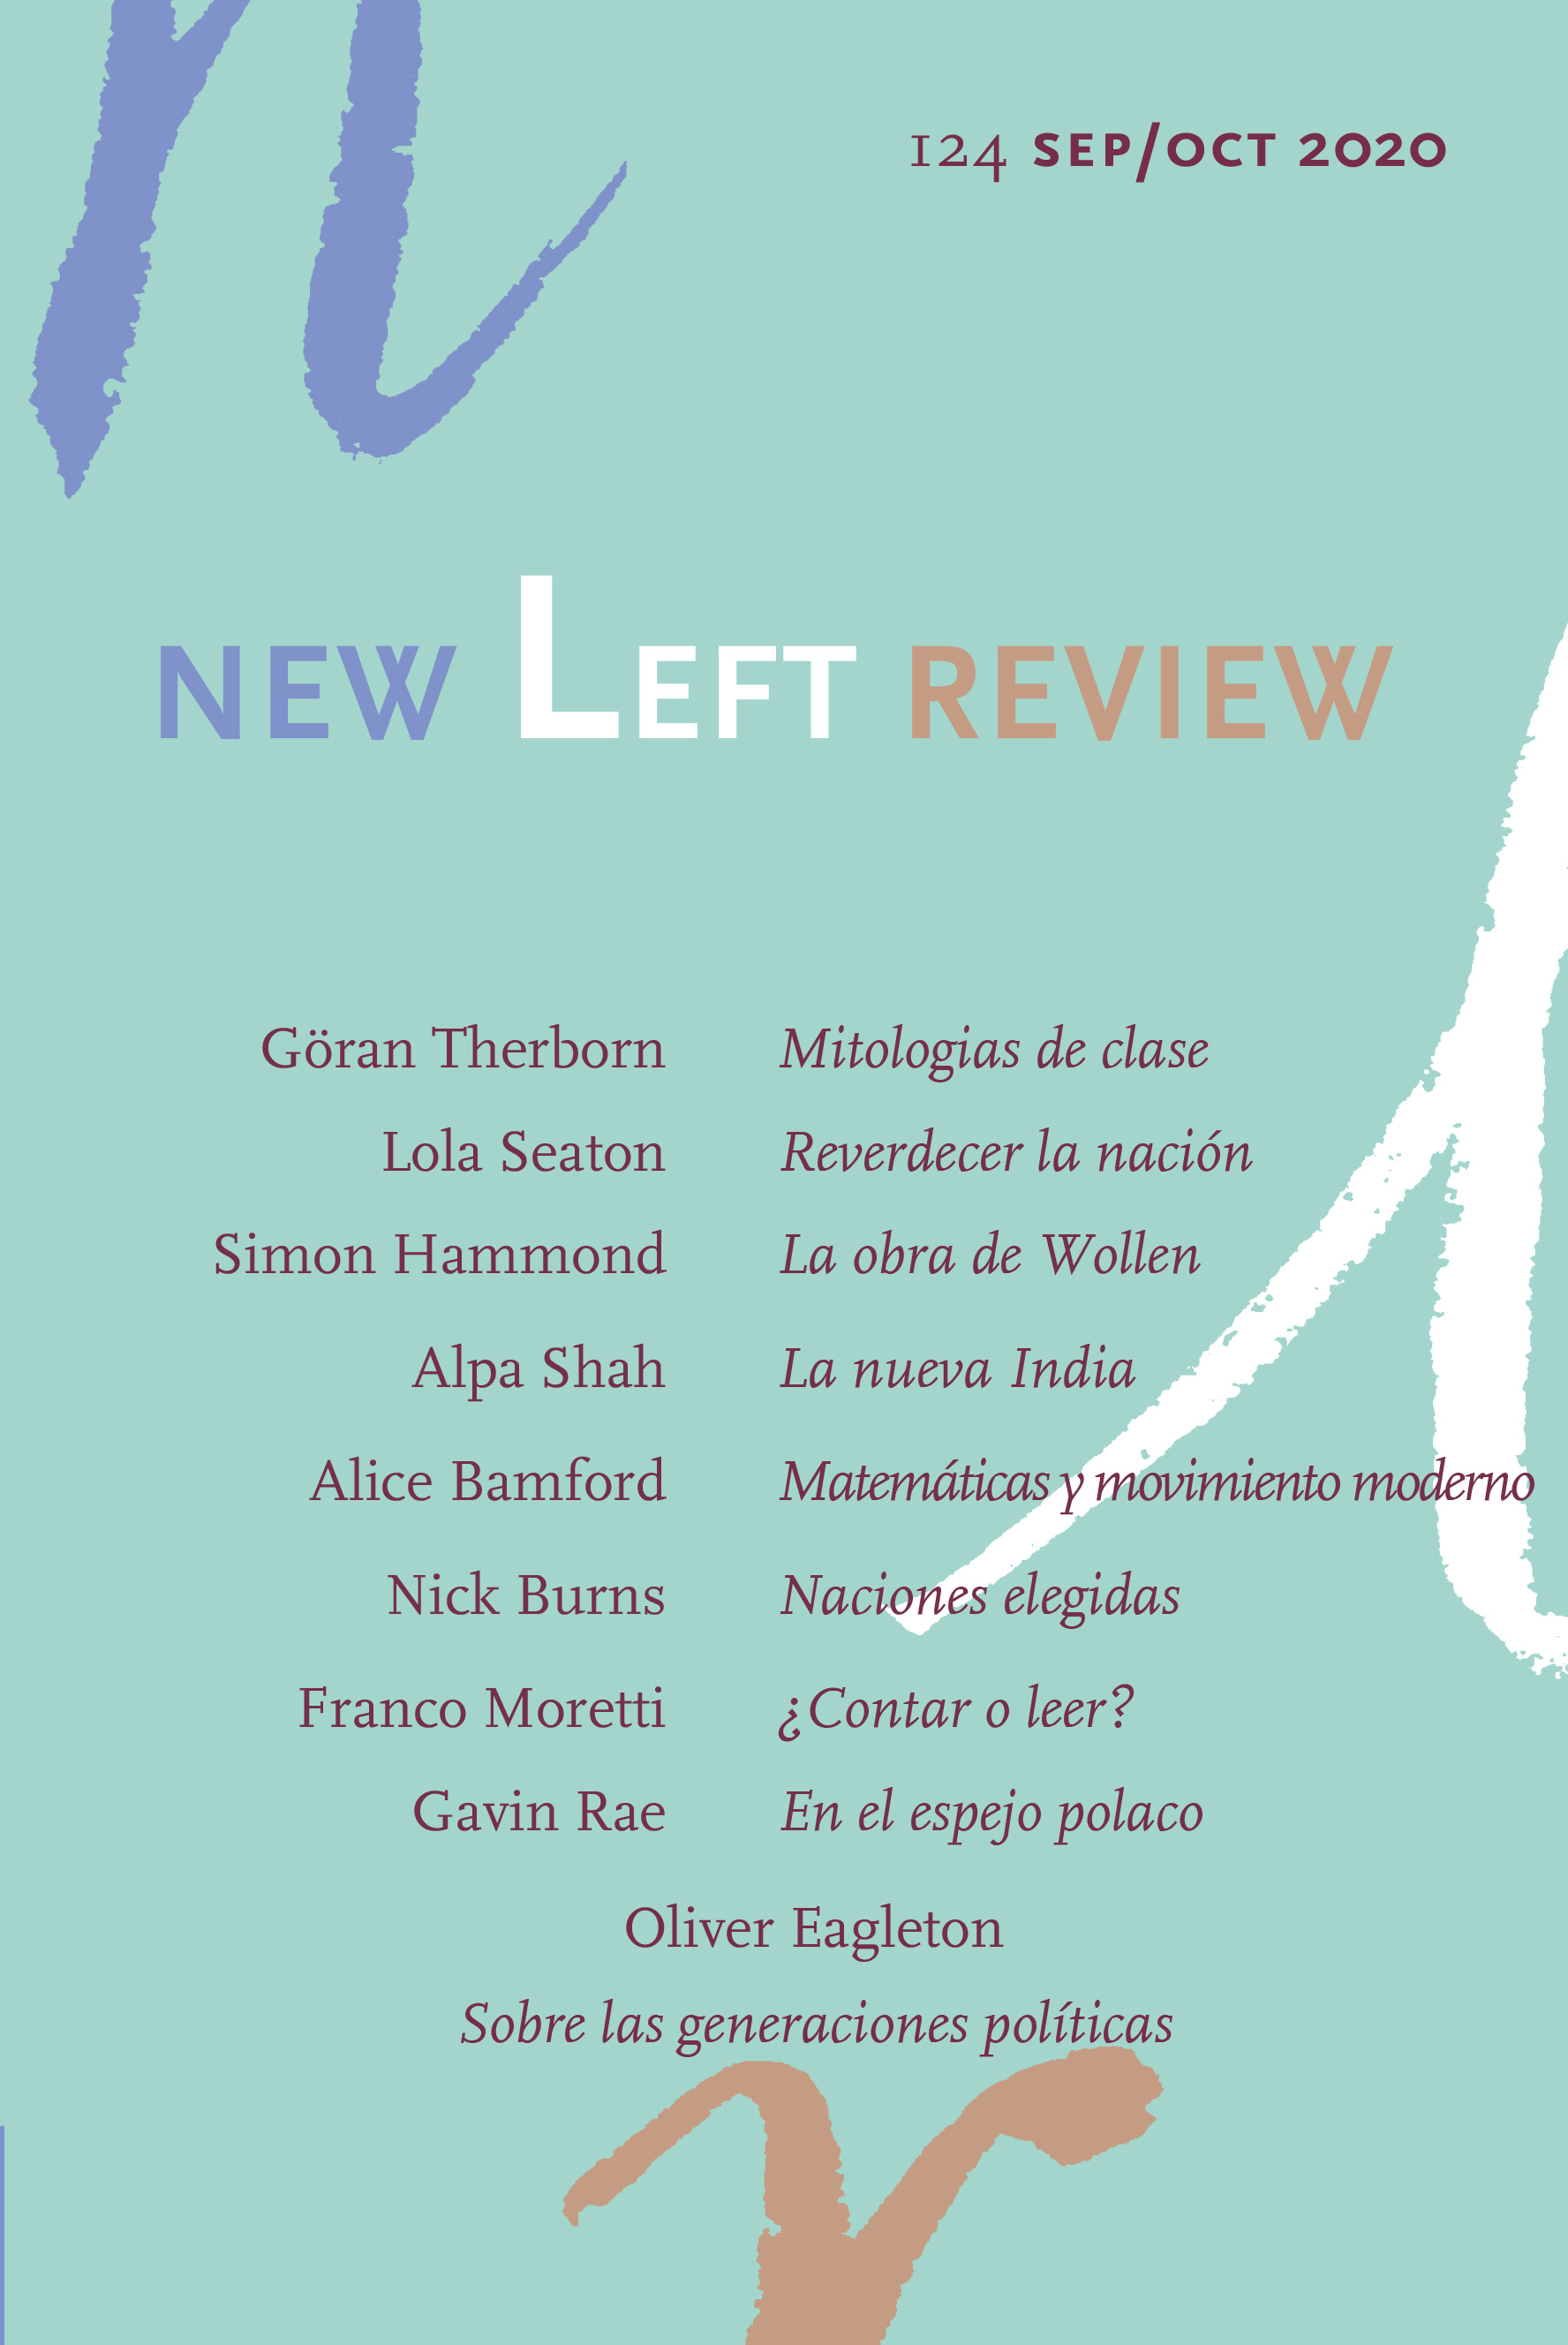 New Left Review 124 (Sep/Oct 2020) - VV AA